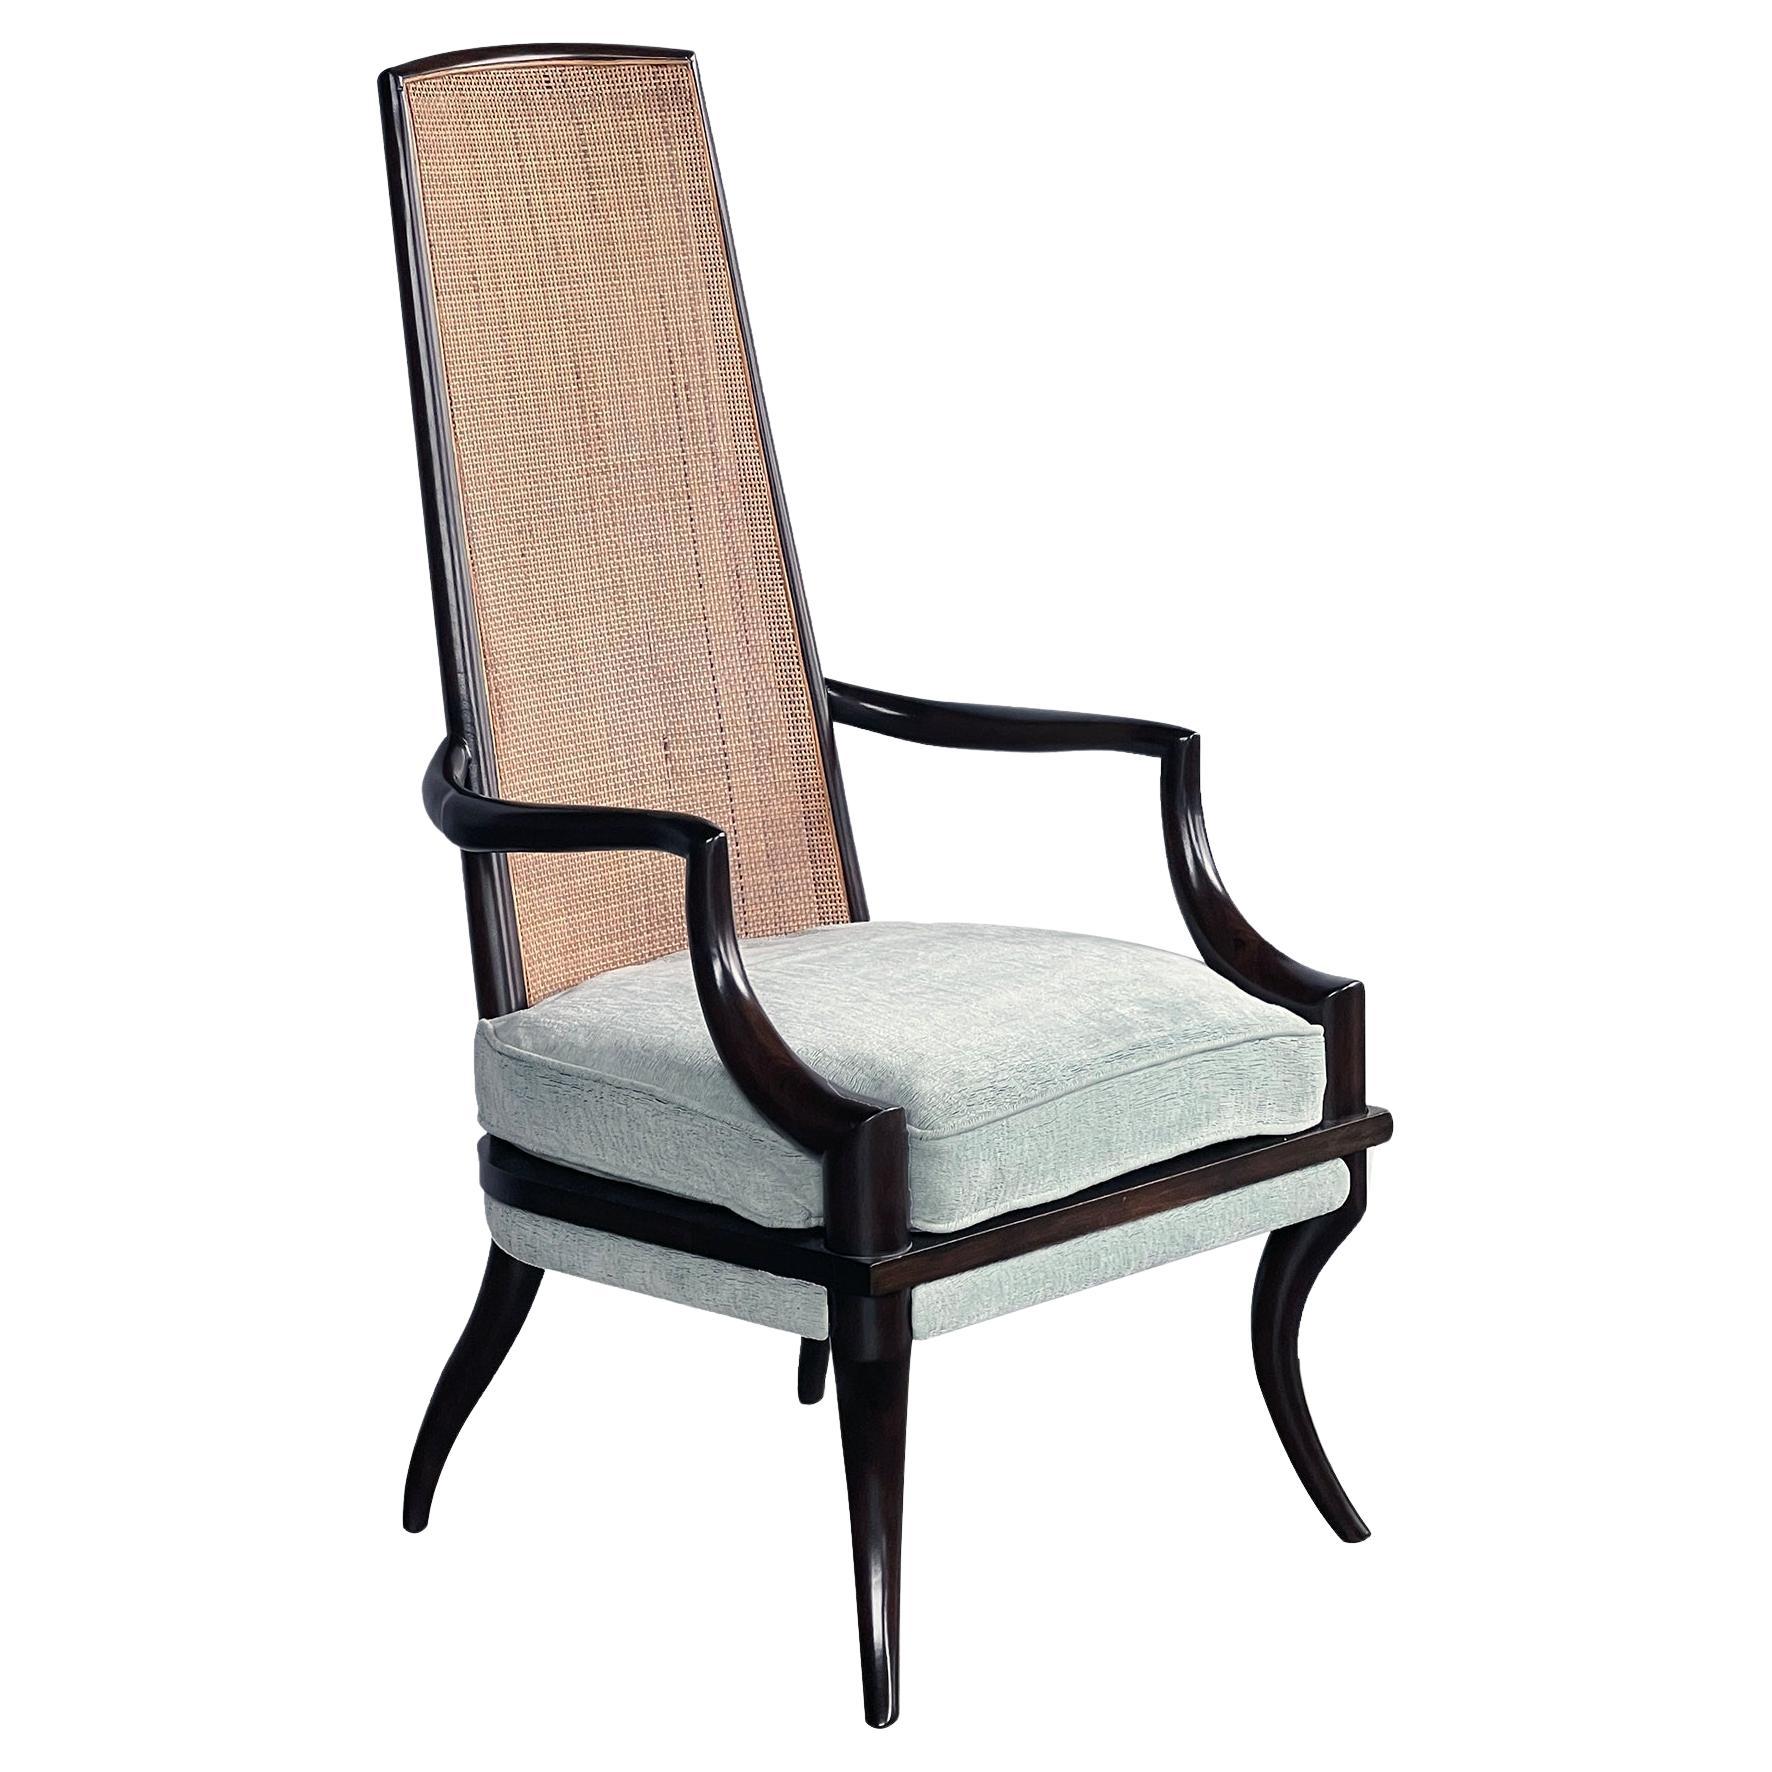 Stylish American 1960s Grand Ledge Caned High-back Arm Chair For Sale